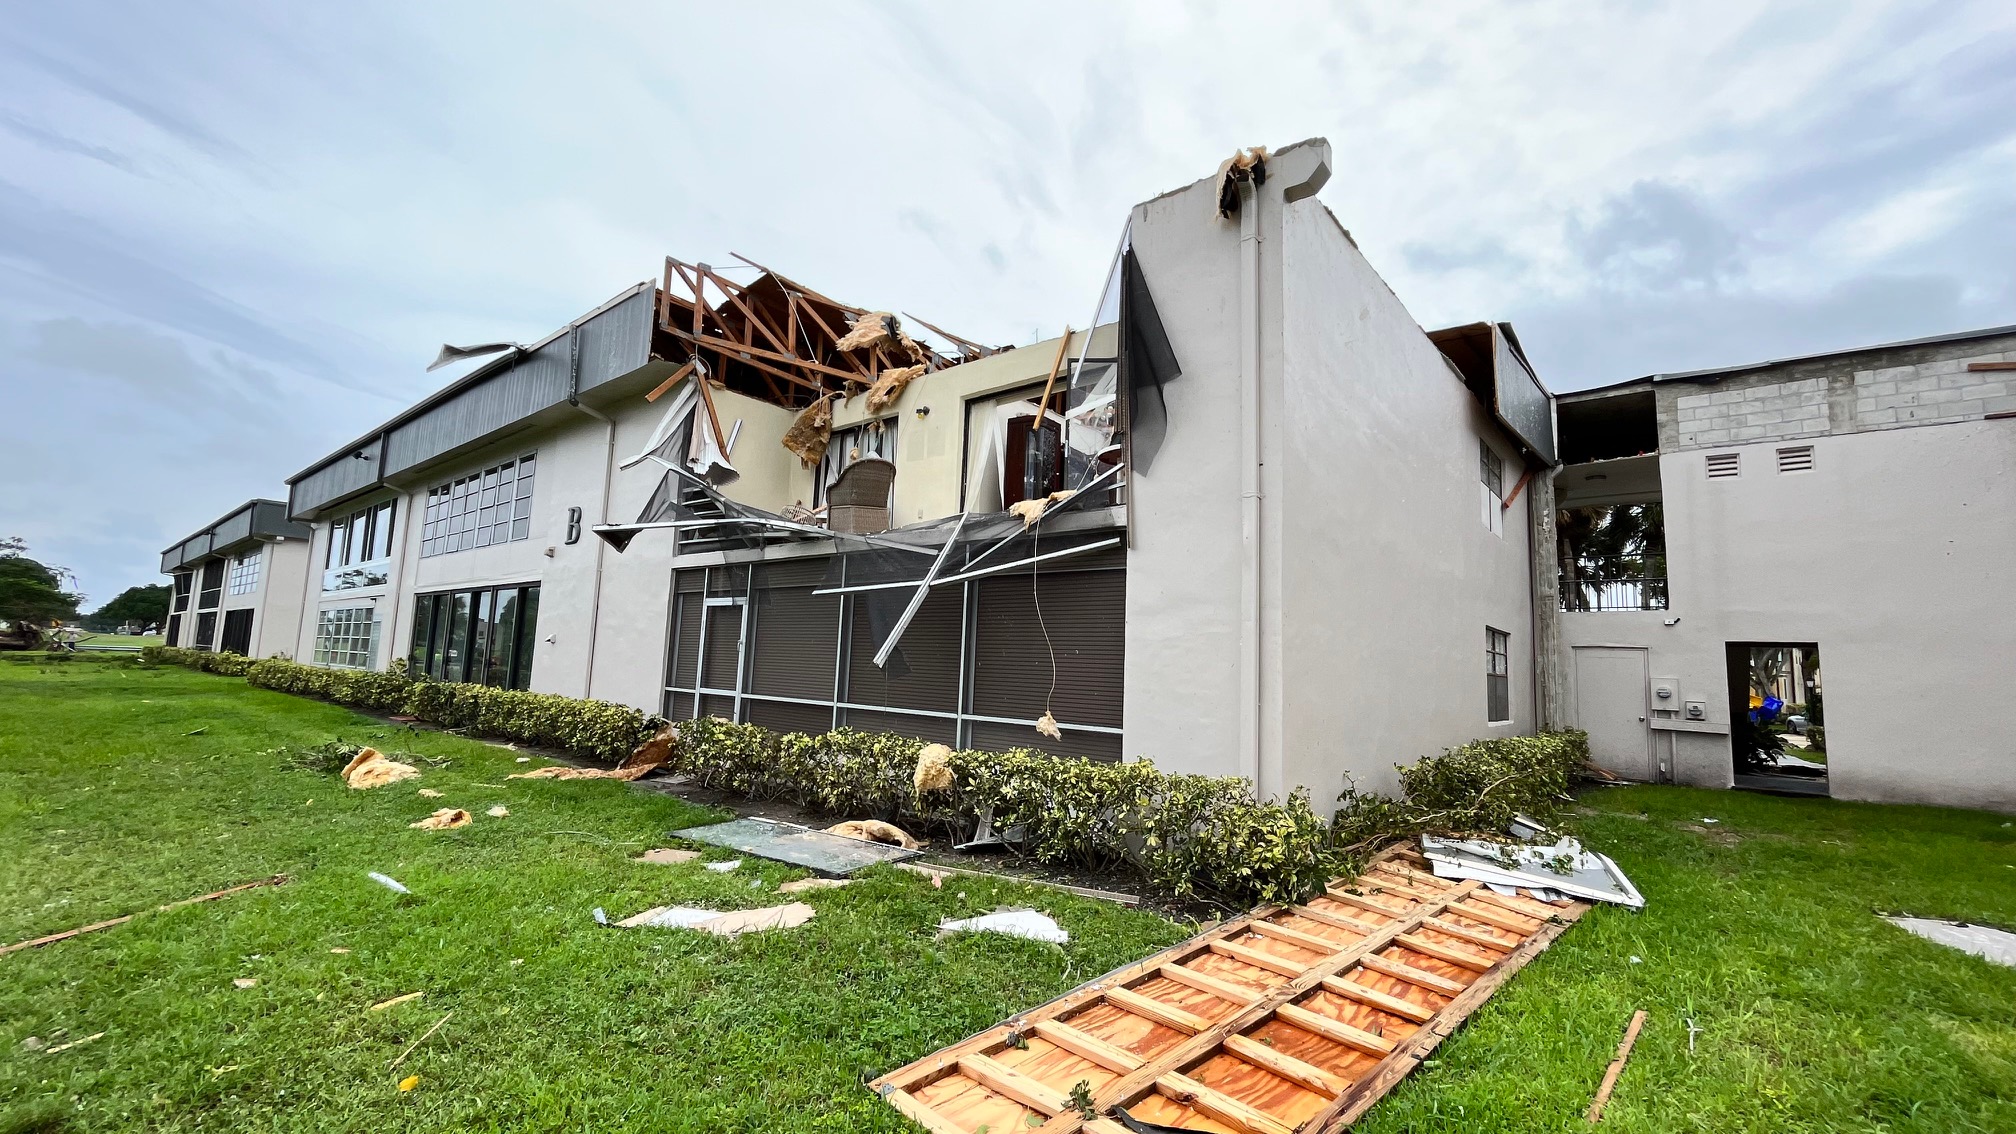 Damage caused by Hurricane Ian in Delray Beach, Florida, September 2022 (David Dellinger/National Weather Service of Miami/Public domain)